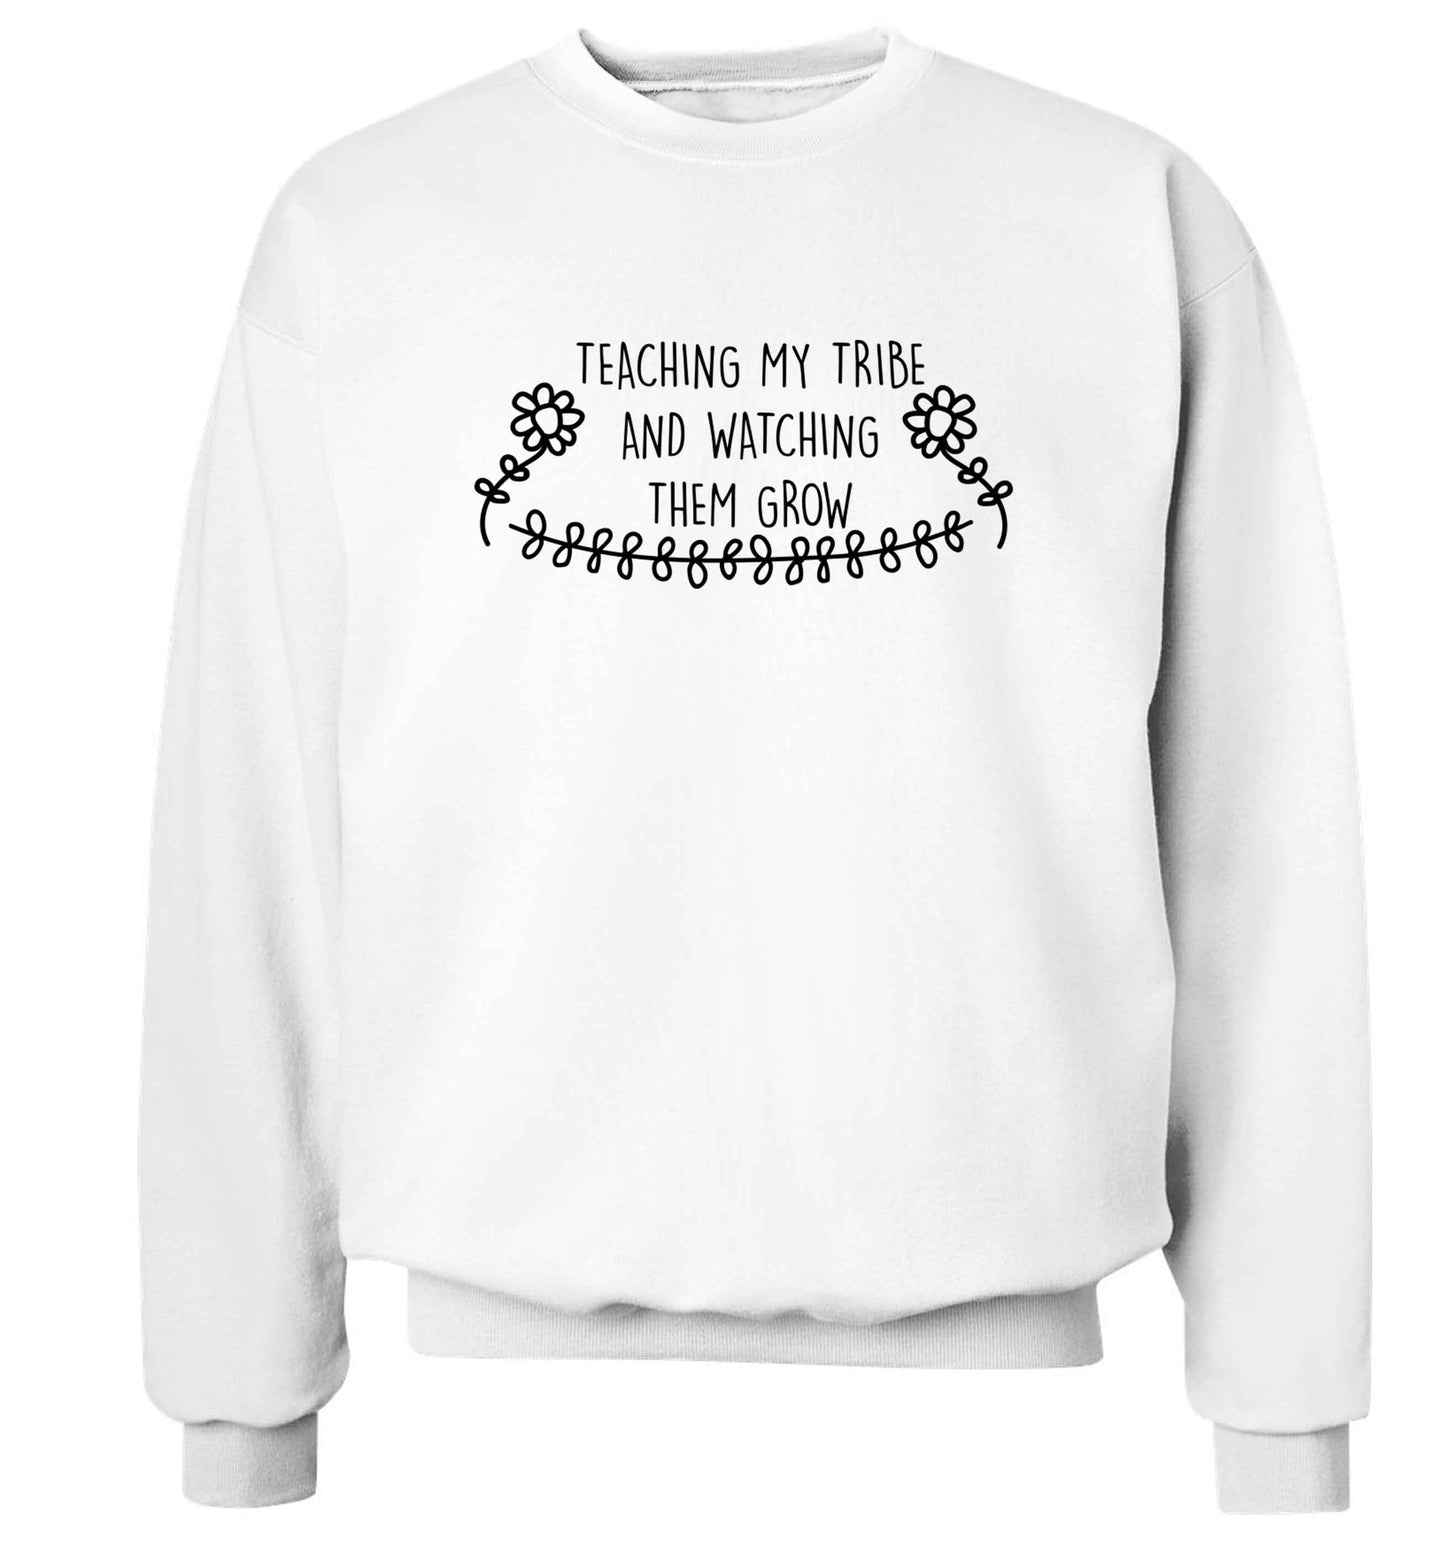 Teaching my tribe and watching them grow Adult's unisex white Sweater 2XL